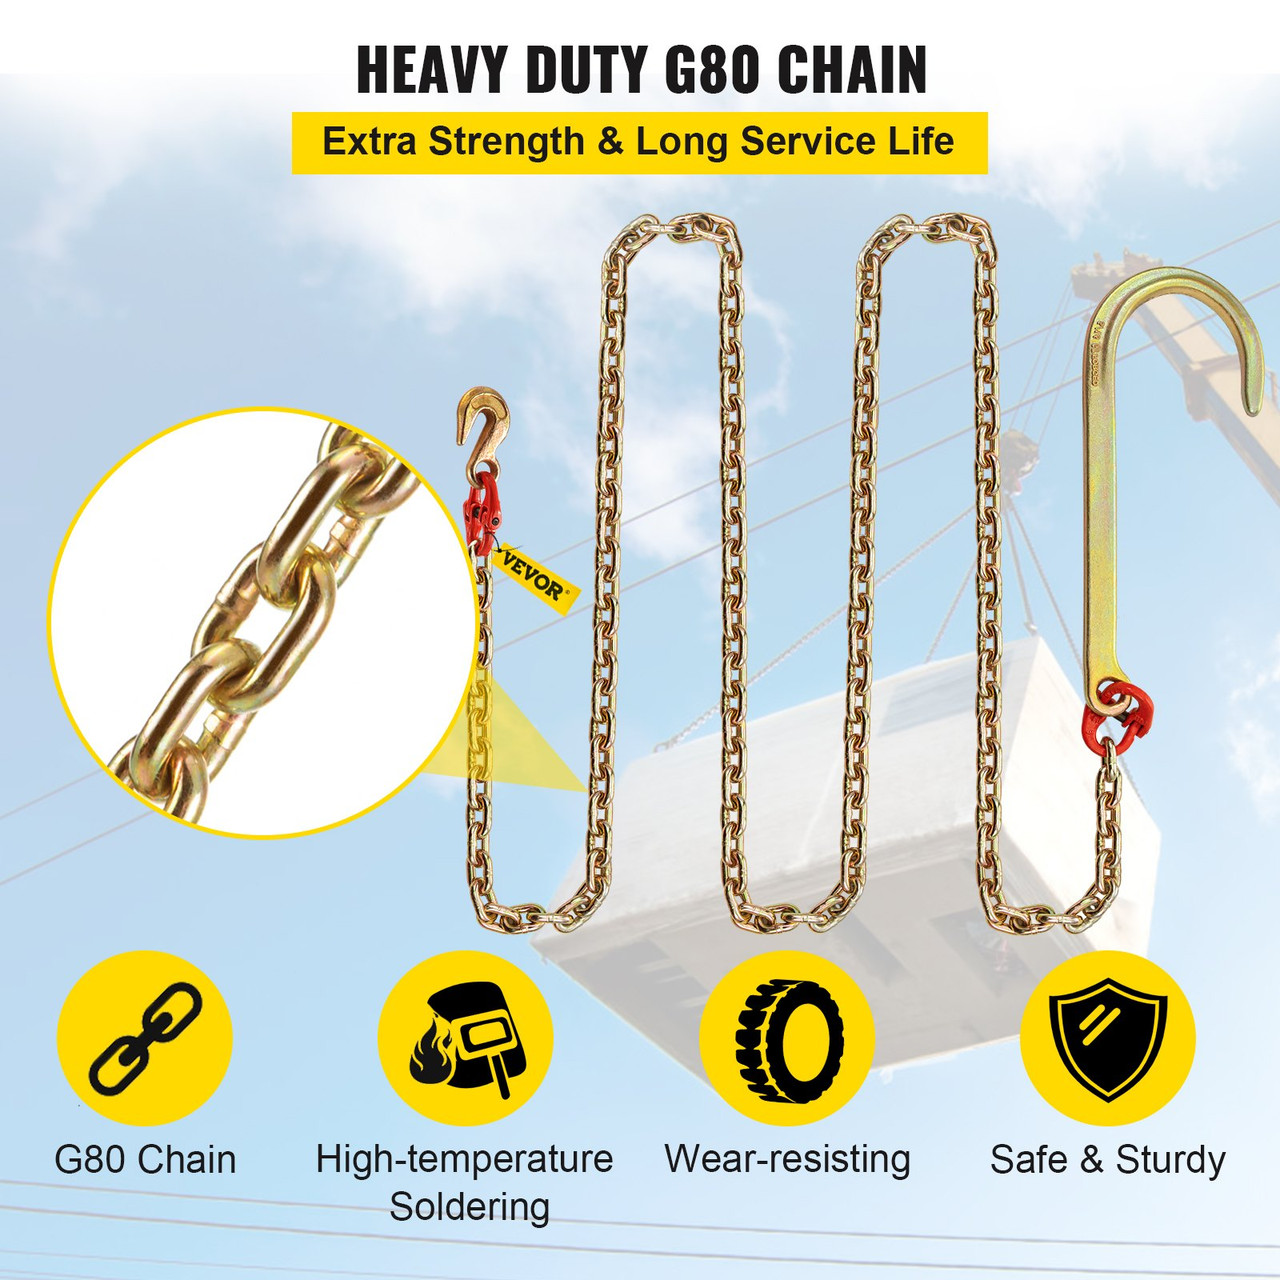 J Hook Chain, 5/16 in x 10 ft Tow Chain Bridle, Grade 80 J Hook Transport Chain, 9260 Lbs Break Strength with J Hook & Grab Hook, Tow Hooks for Trucks, Heavy Duty J Hook and Chain Shorteners